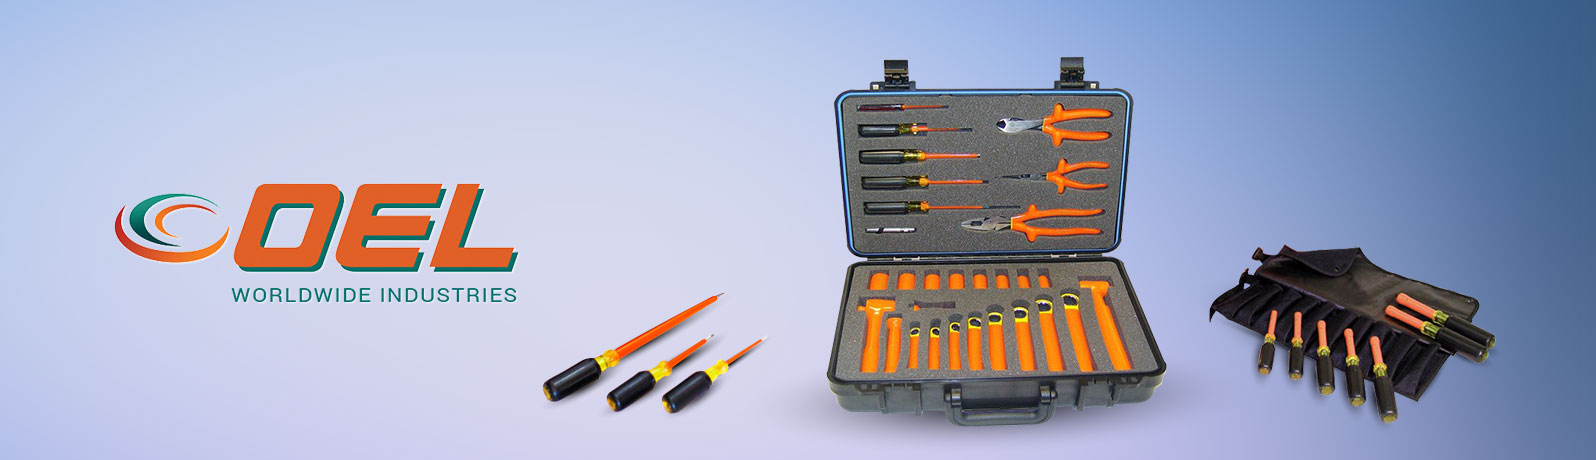 oel-insulated-tools